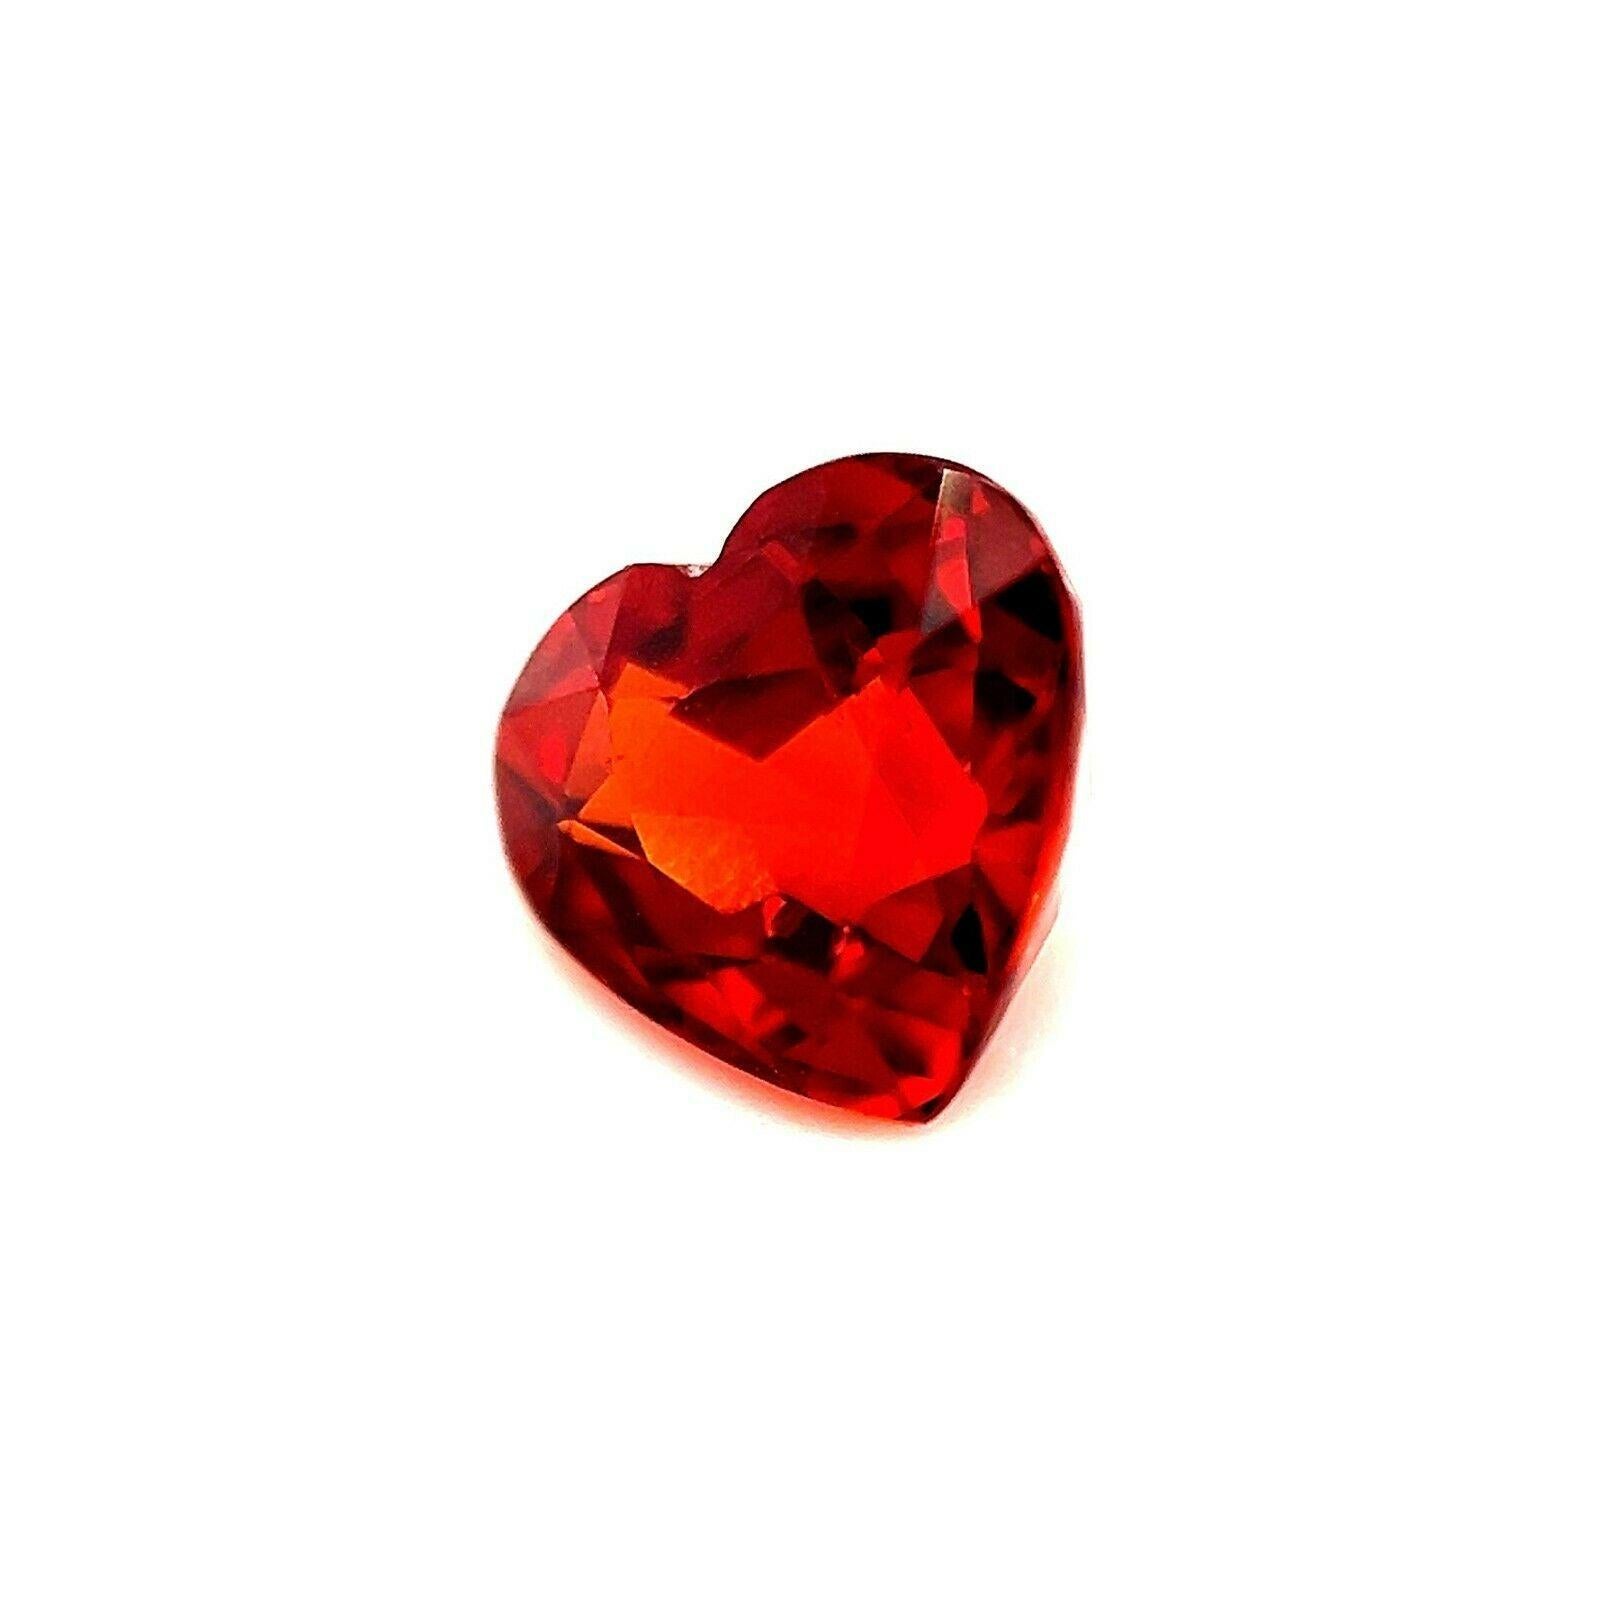 Fine1.13ct Vivid Orange Red Spessartine Garnet Heart Cut Loose Gem 6.2x5.7mm

Fine Natural Spessartine Garnet Loose Gemstone.
1.13 Carat with a beautiful reddish orange colour and very good clarity. This stone also has an excellent heart cut with